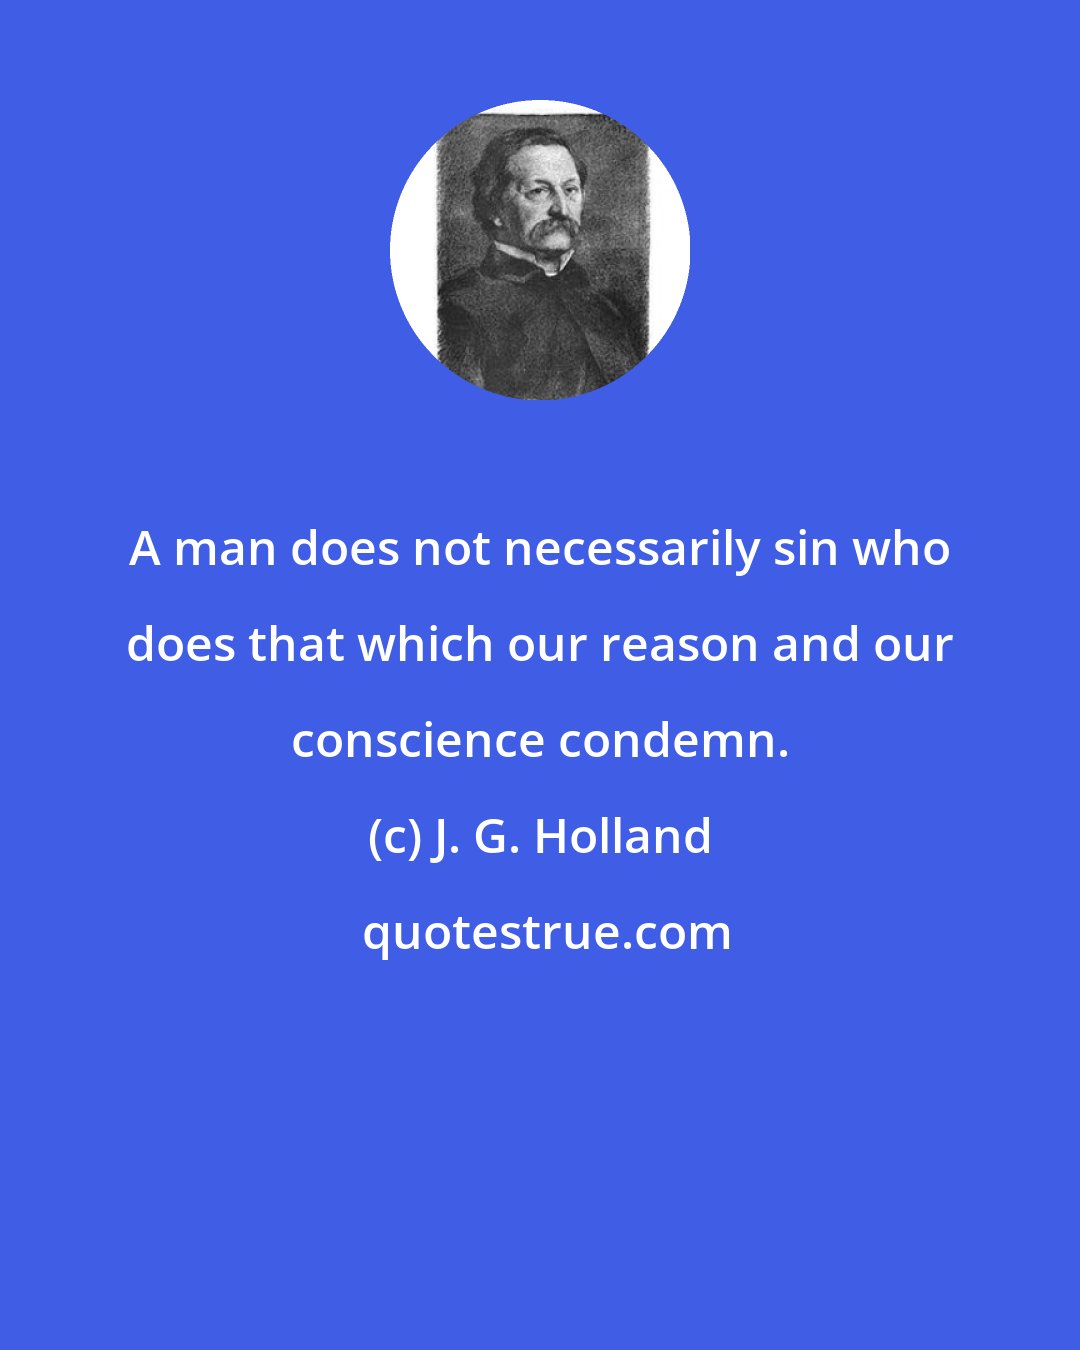 J. G. Holland: A man does not necessarily sin who does that which our reason and our conscience condemn.